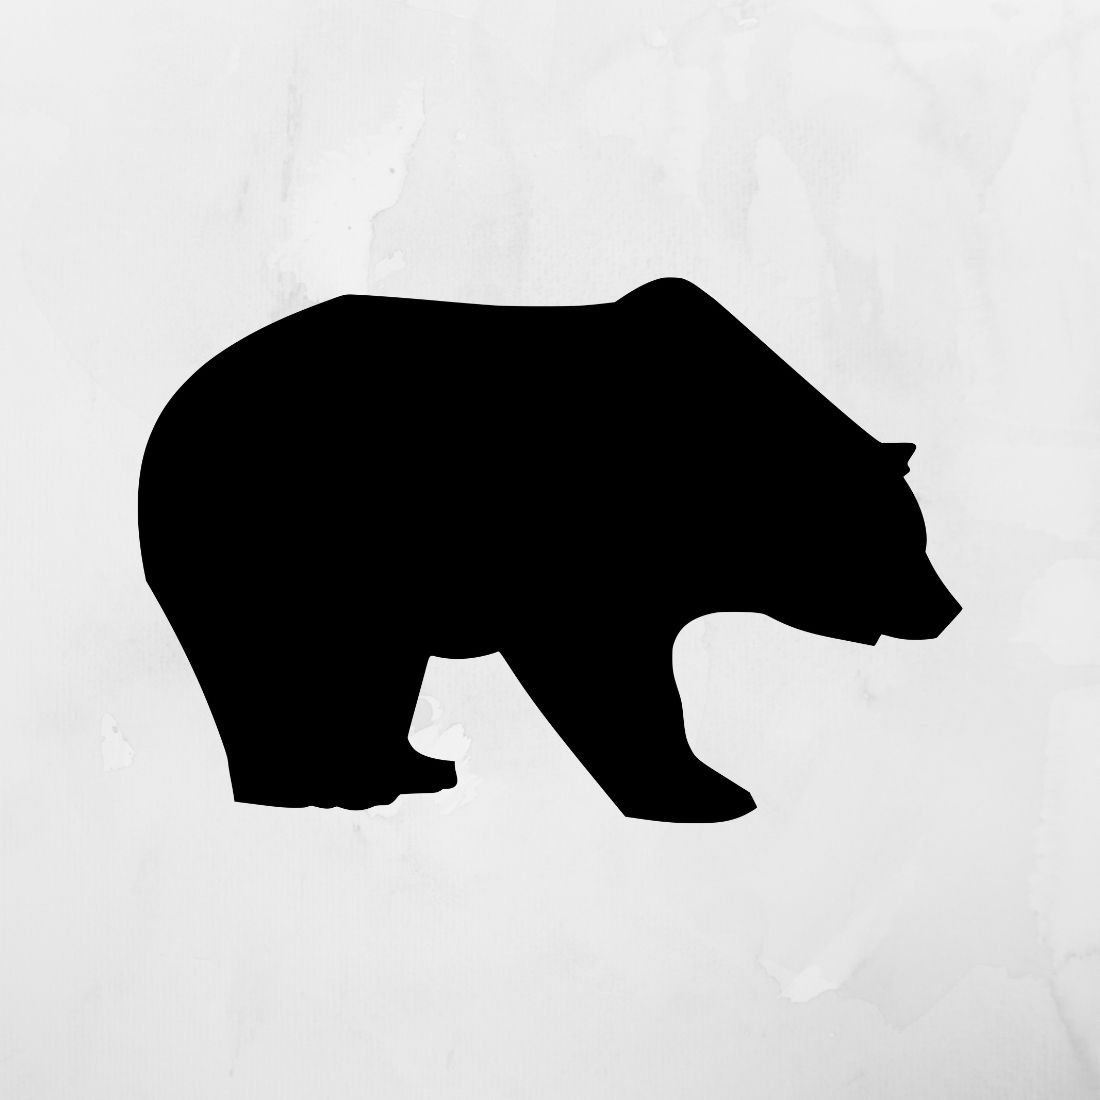 Black bear silhouette on a white background.